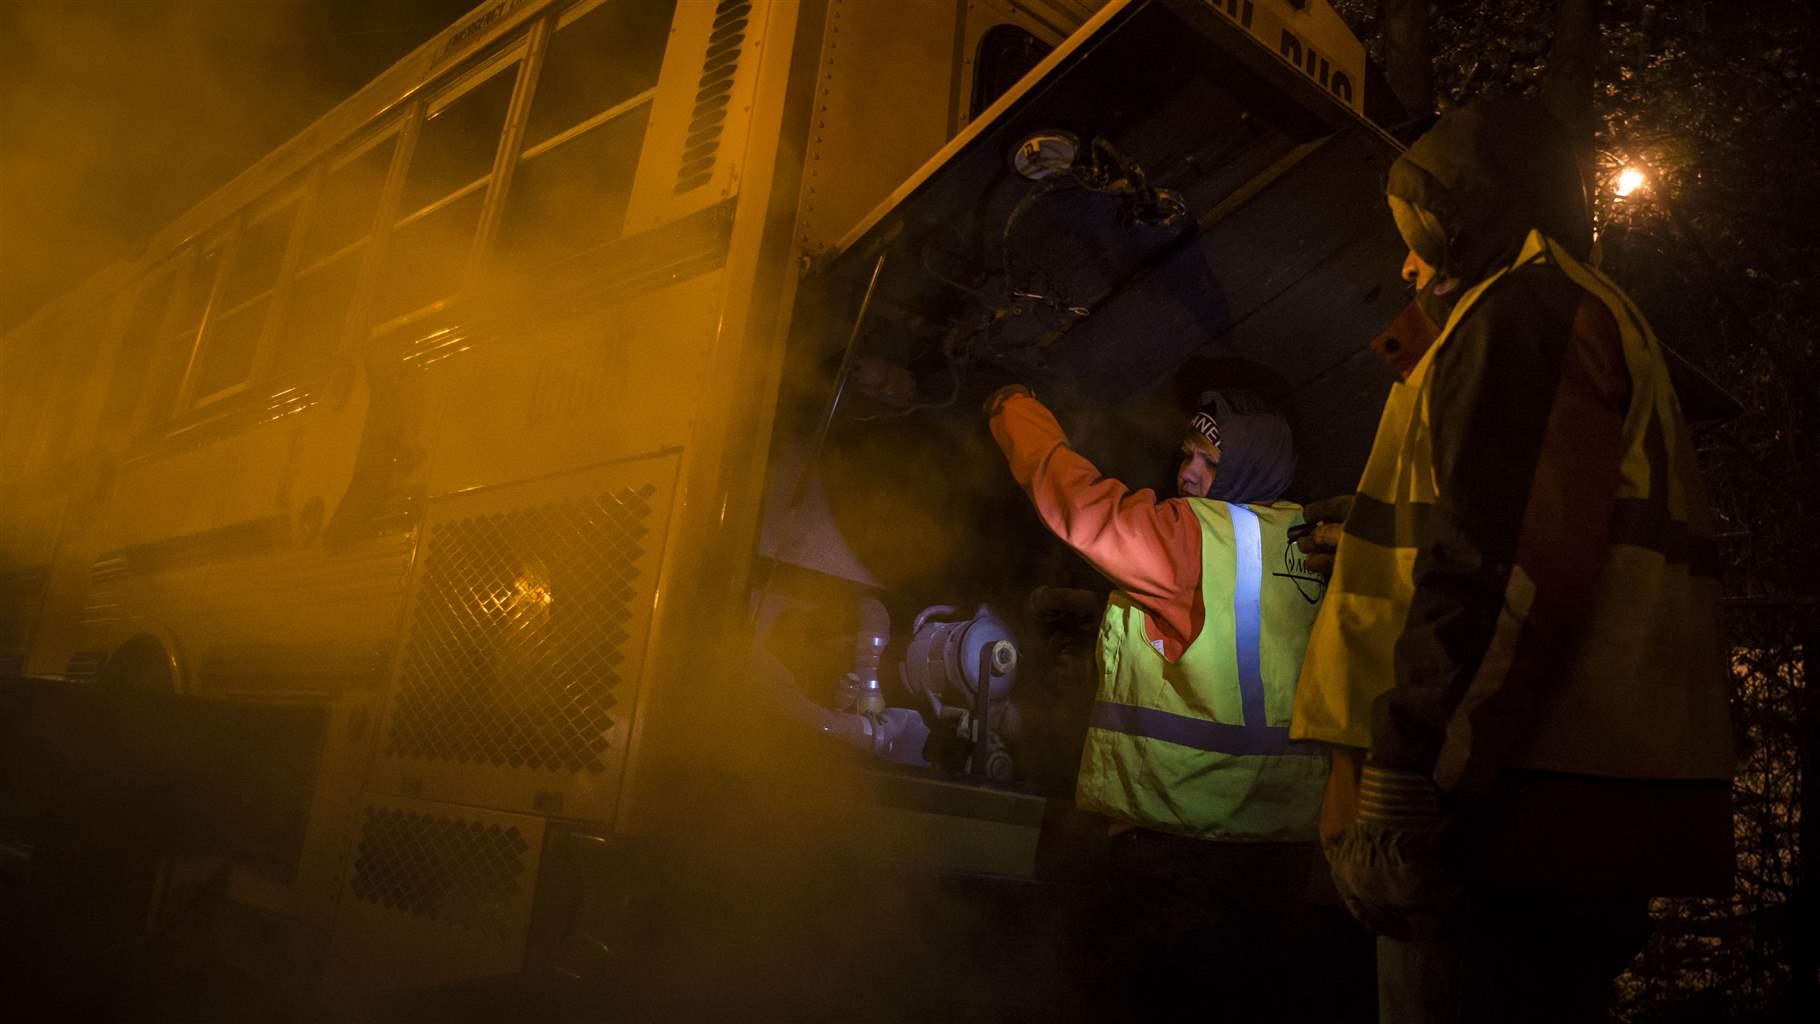 Under amber streetlights, two workers dressed in warm clothing and safety vests work under a flap at the back of a school bus to start it on a dark morning. Bus exhaust is rising from the vehicle adjacent to the workers. 